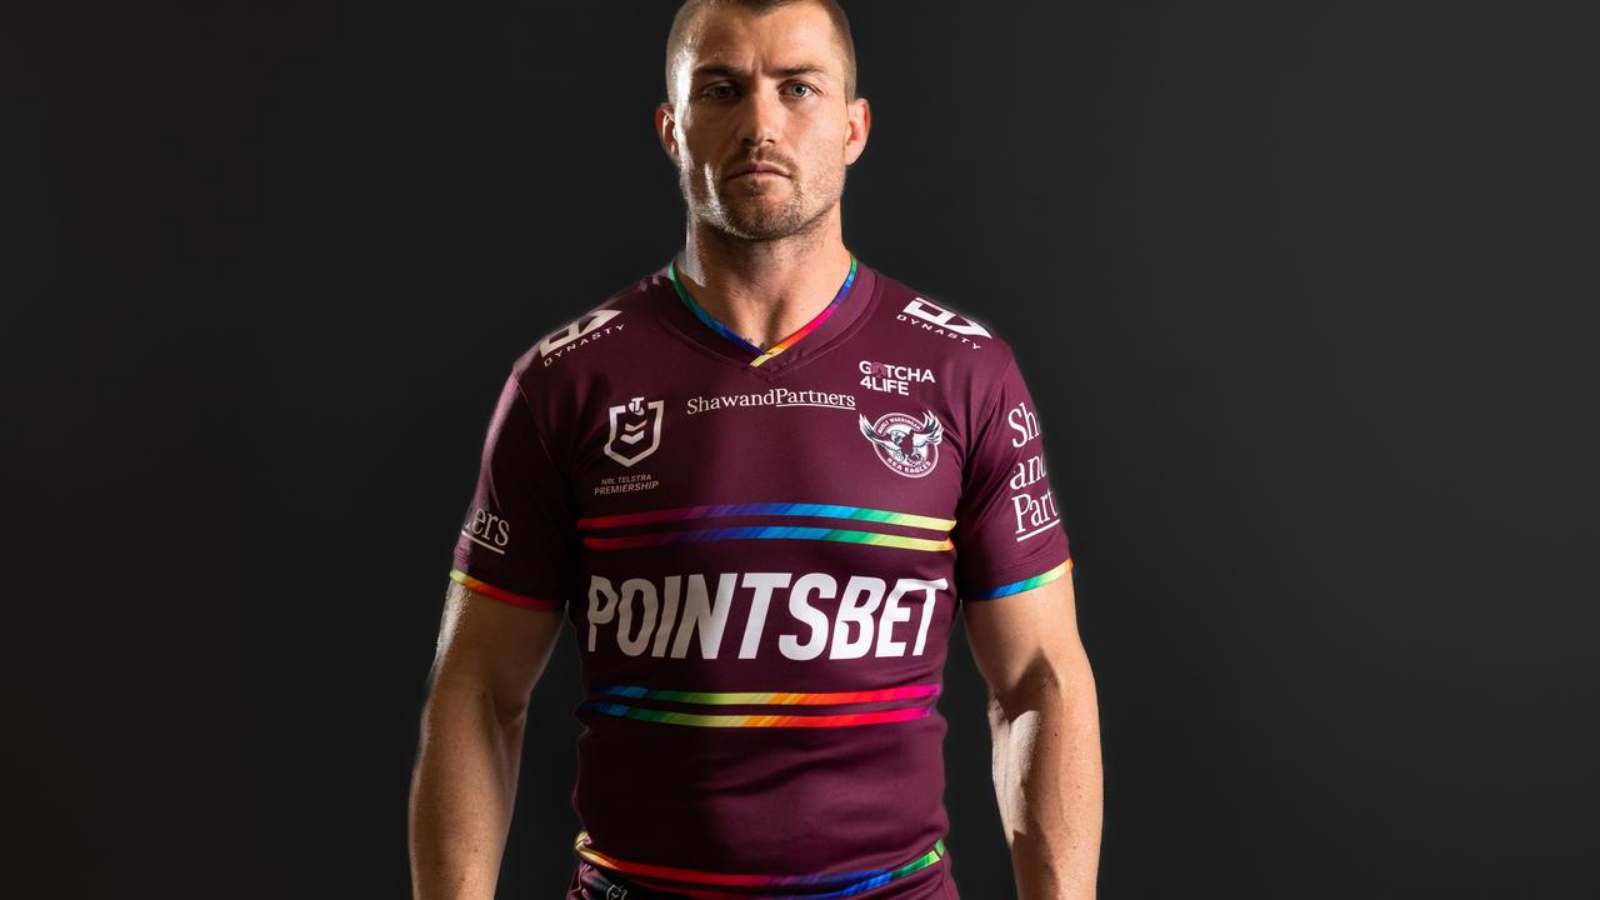 The new pride Jersey of Manly Sea Eagles